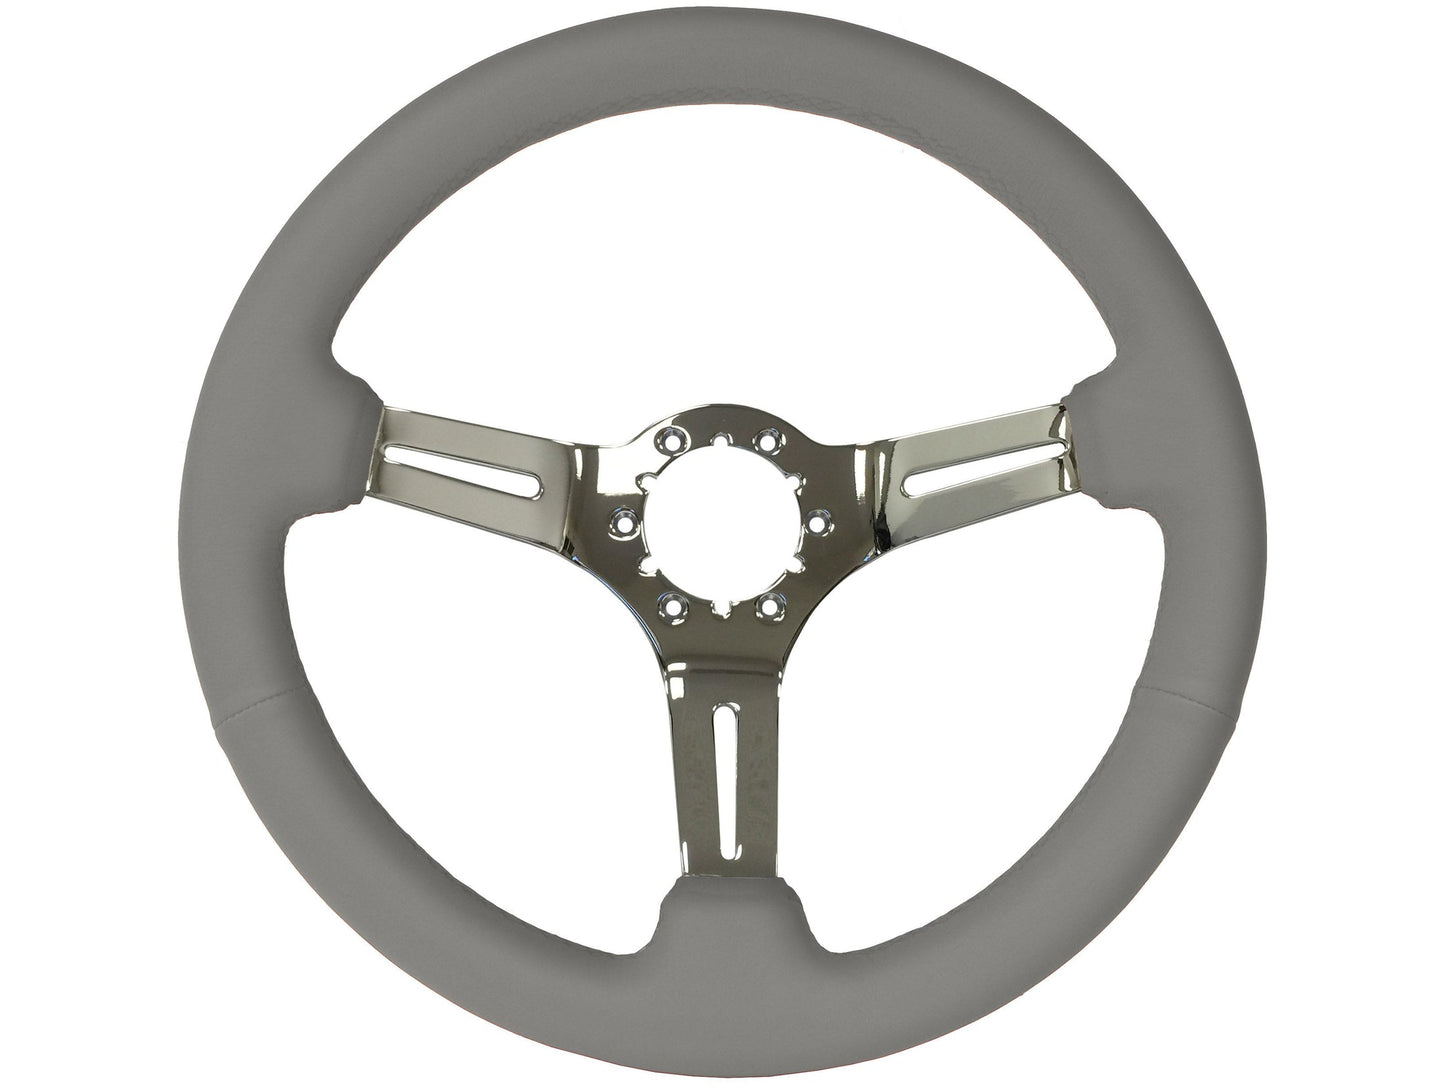 1997-04 Porsche Boxster (986 Manual) Steering Wheel Kit | Grey Leather | ST3012GRY